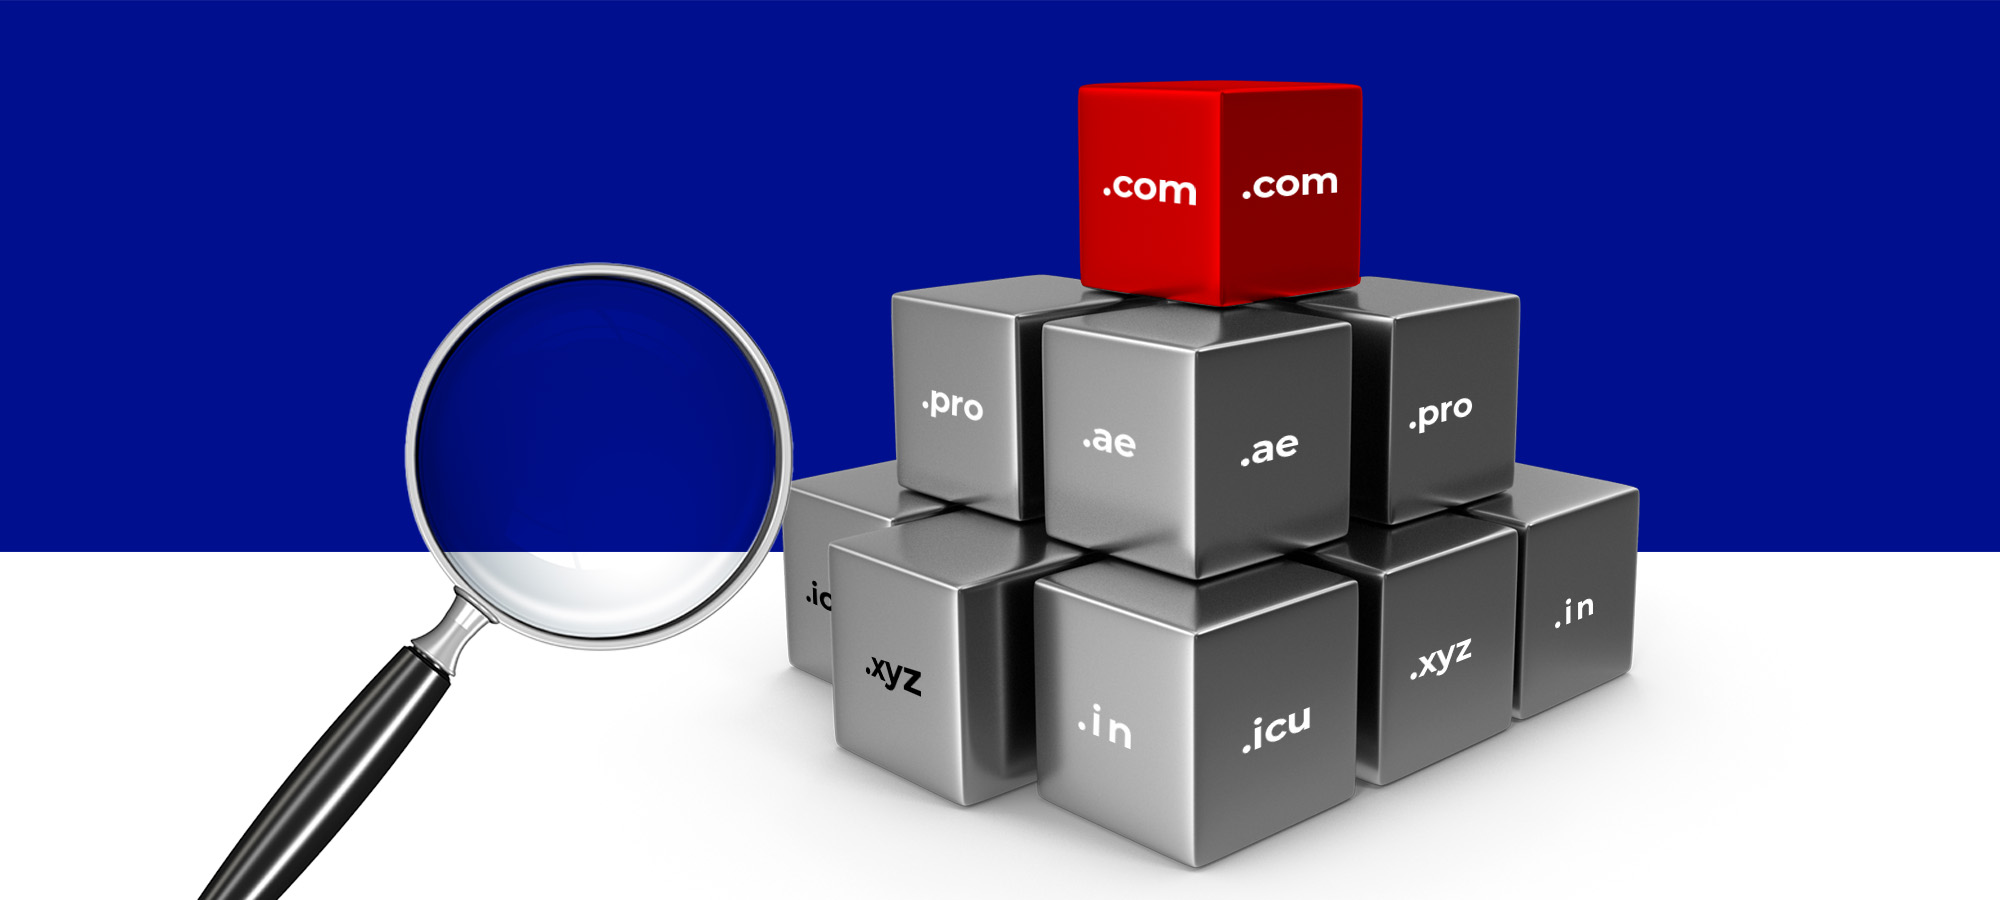 Factors to Consider When Selecting a Domain Name?